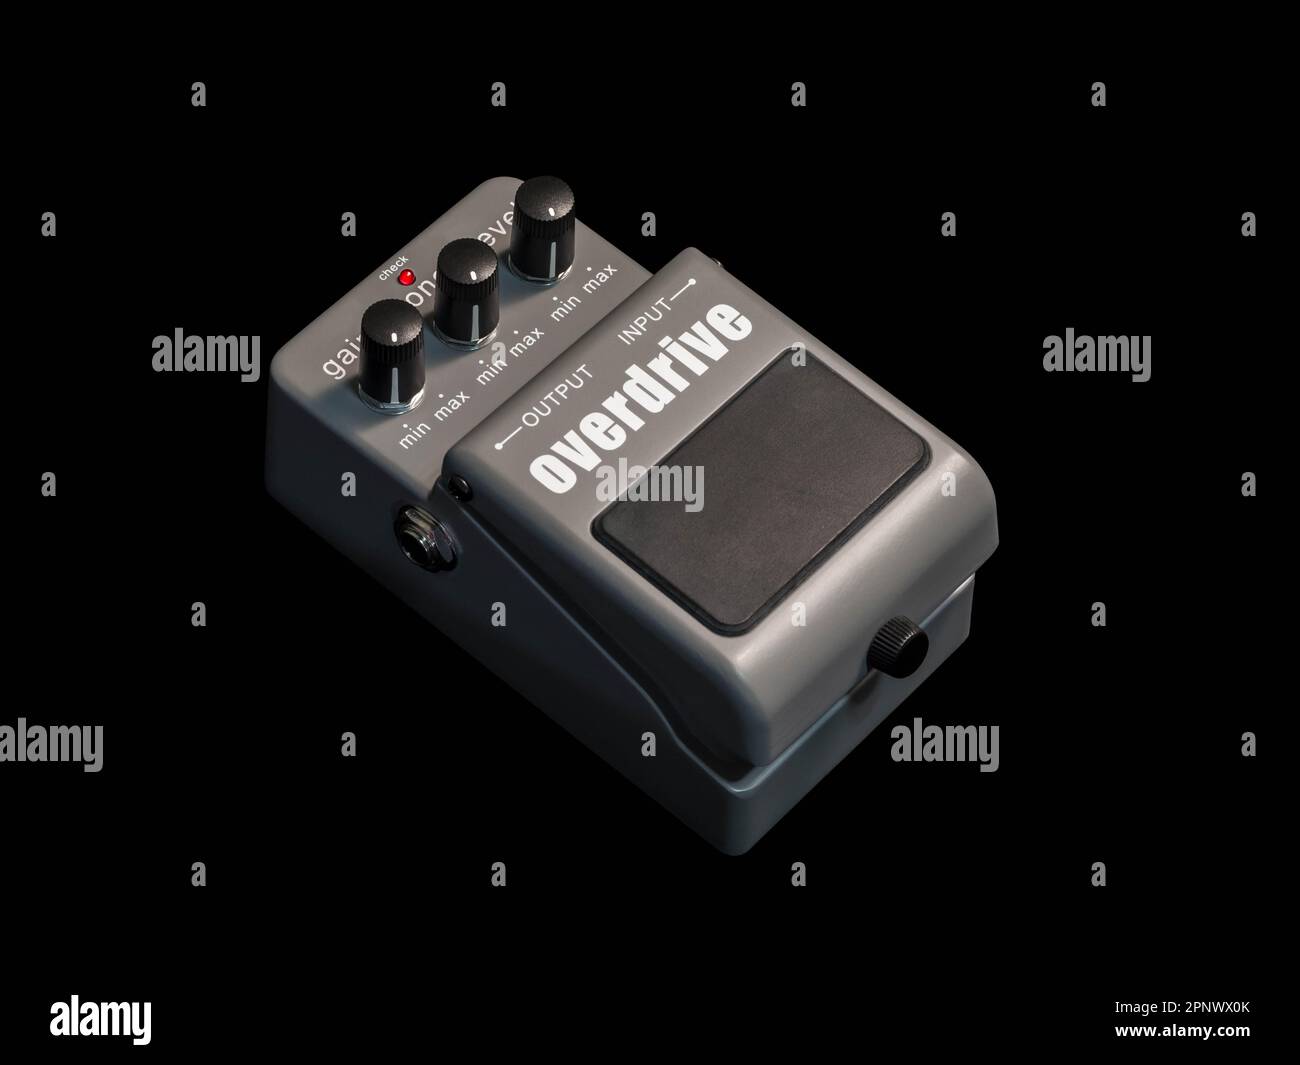 guitar effect pedal isolated on white Stock Photo - Alamy